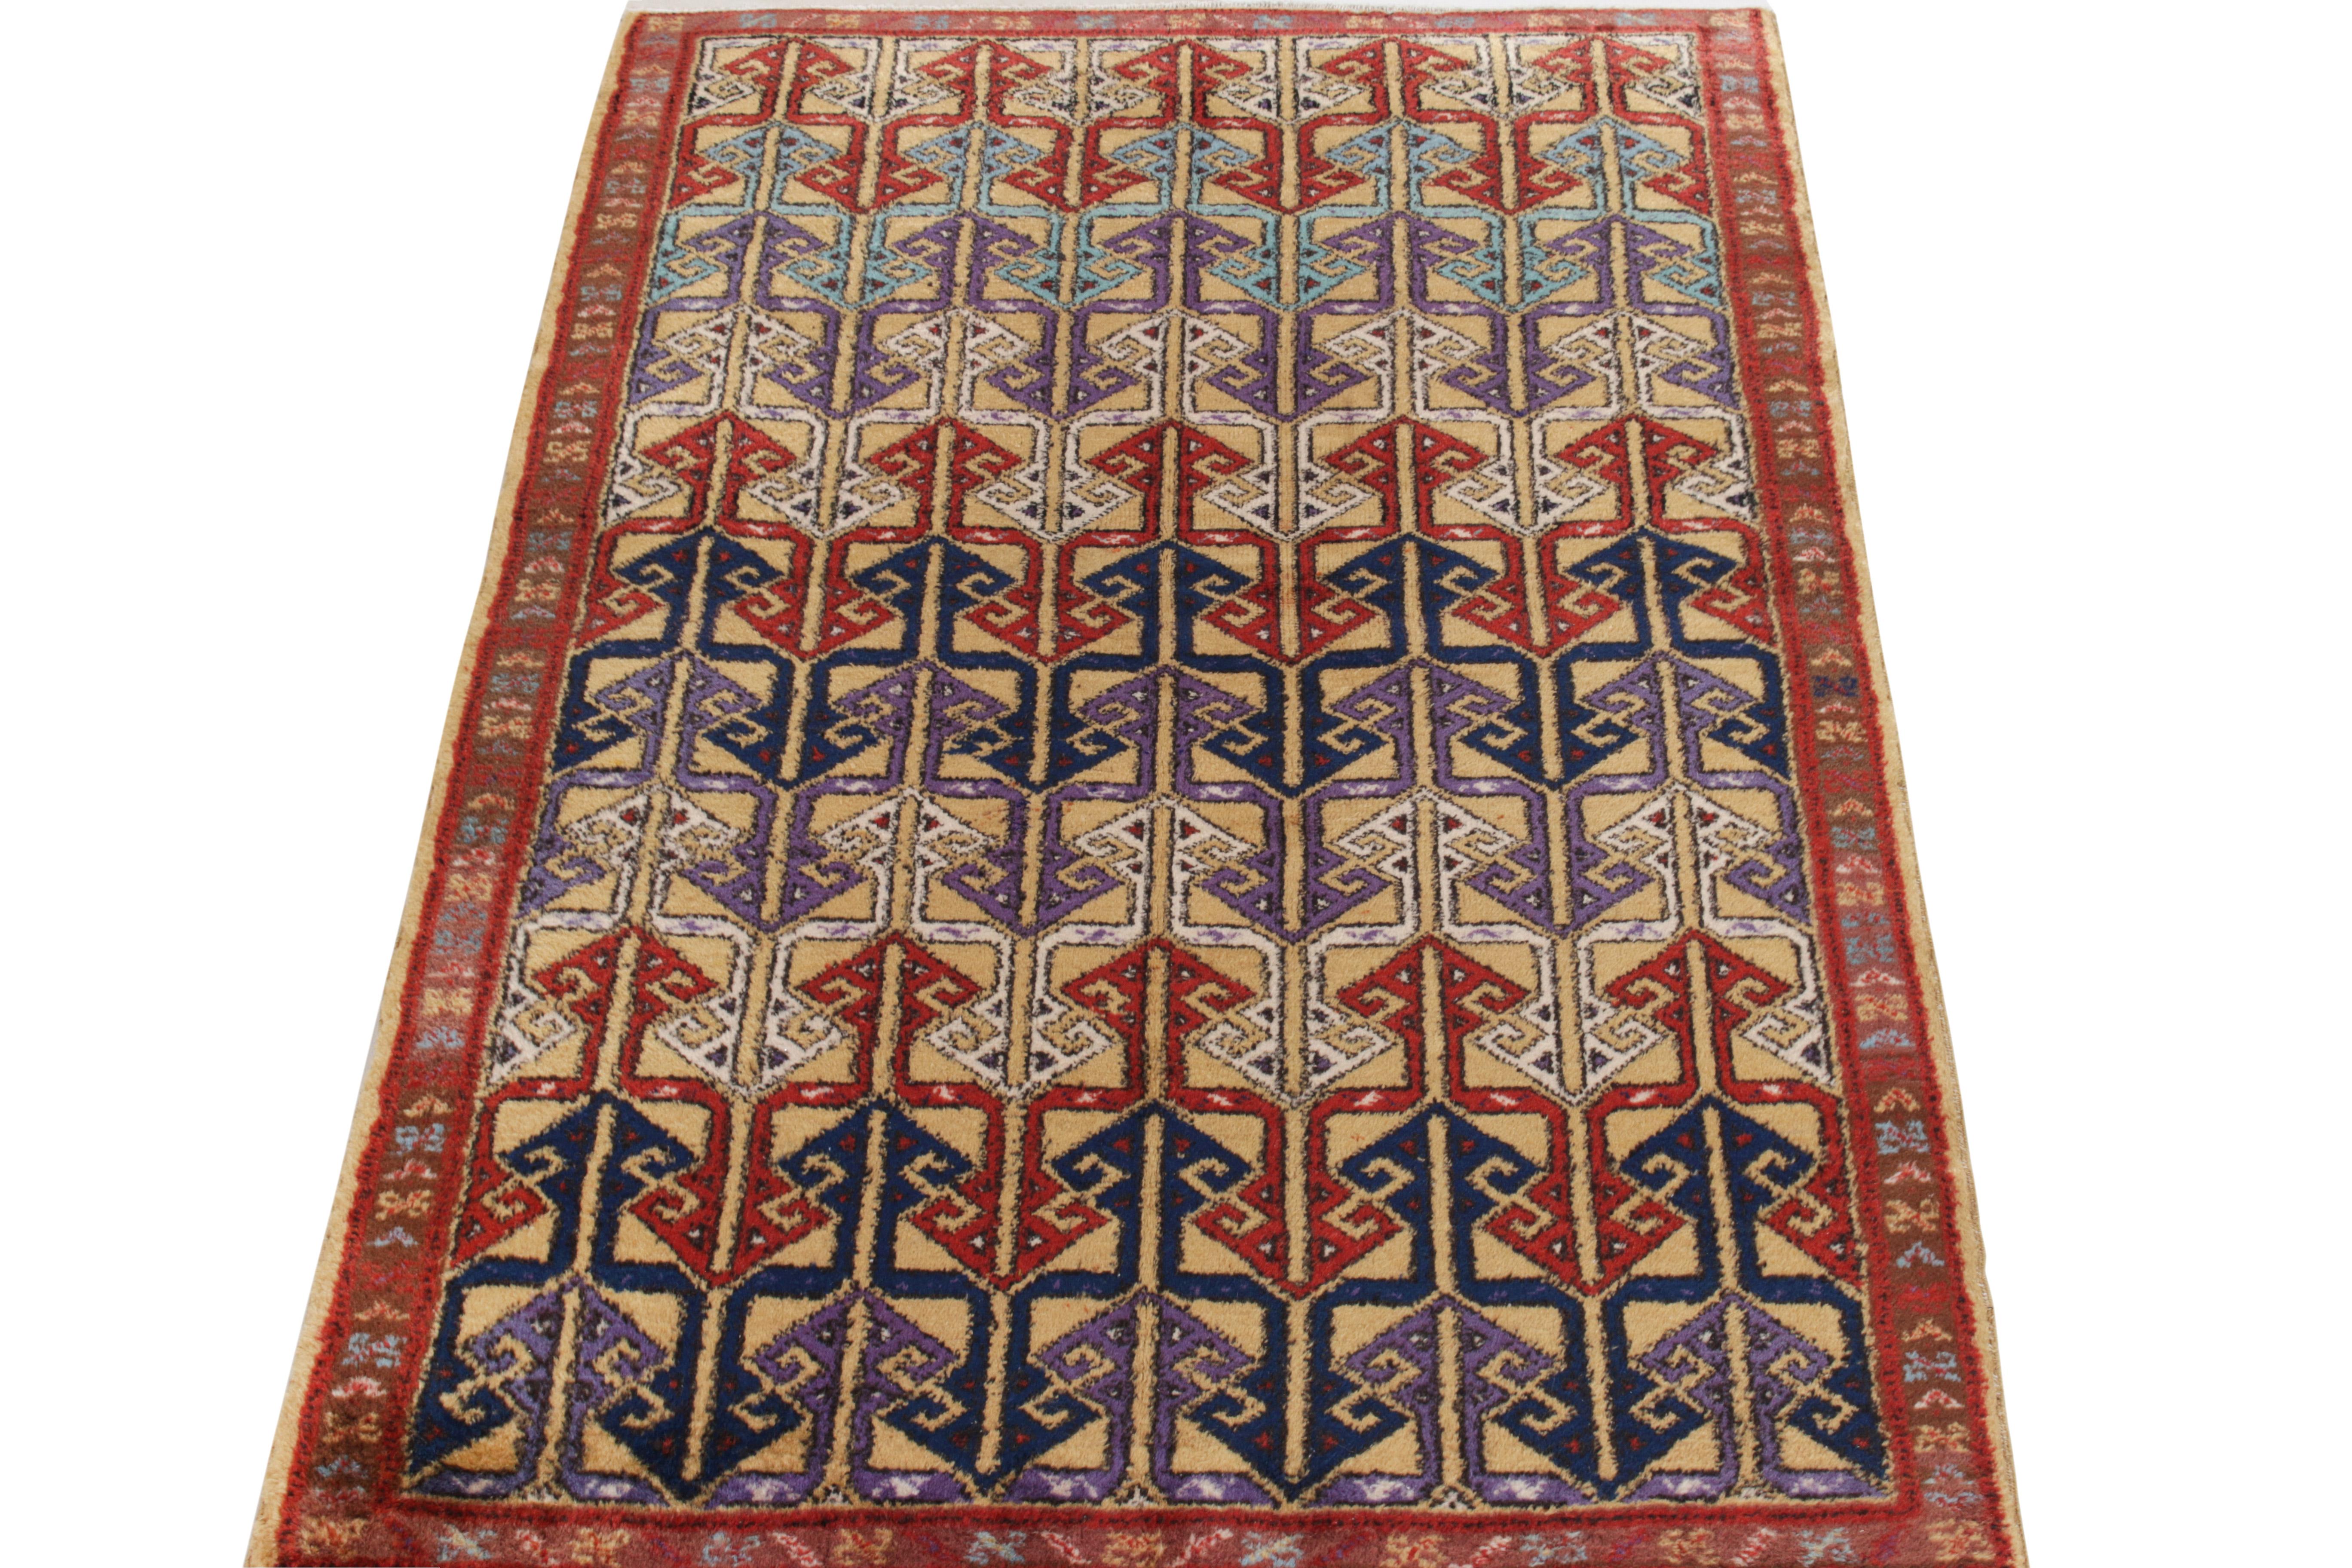 Hand-knotted in wool, a 4 x 6 vintage rug from a bold multidisciplinary Turkish designer commemorated in Rug & Kilim’s mid-century Pasha Collection. An uncommon geometric pattern in bold red, lilac, white & tones of blue sits comfortably on a beige